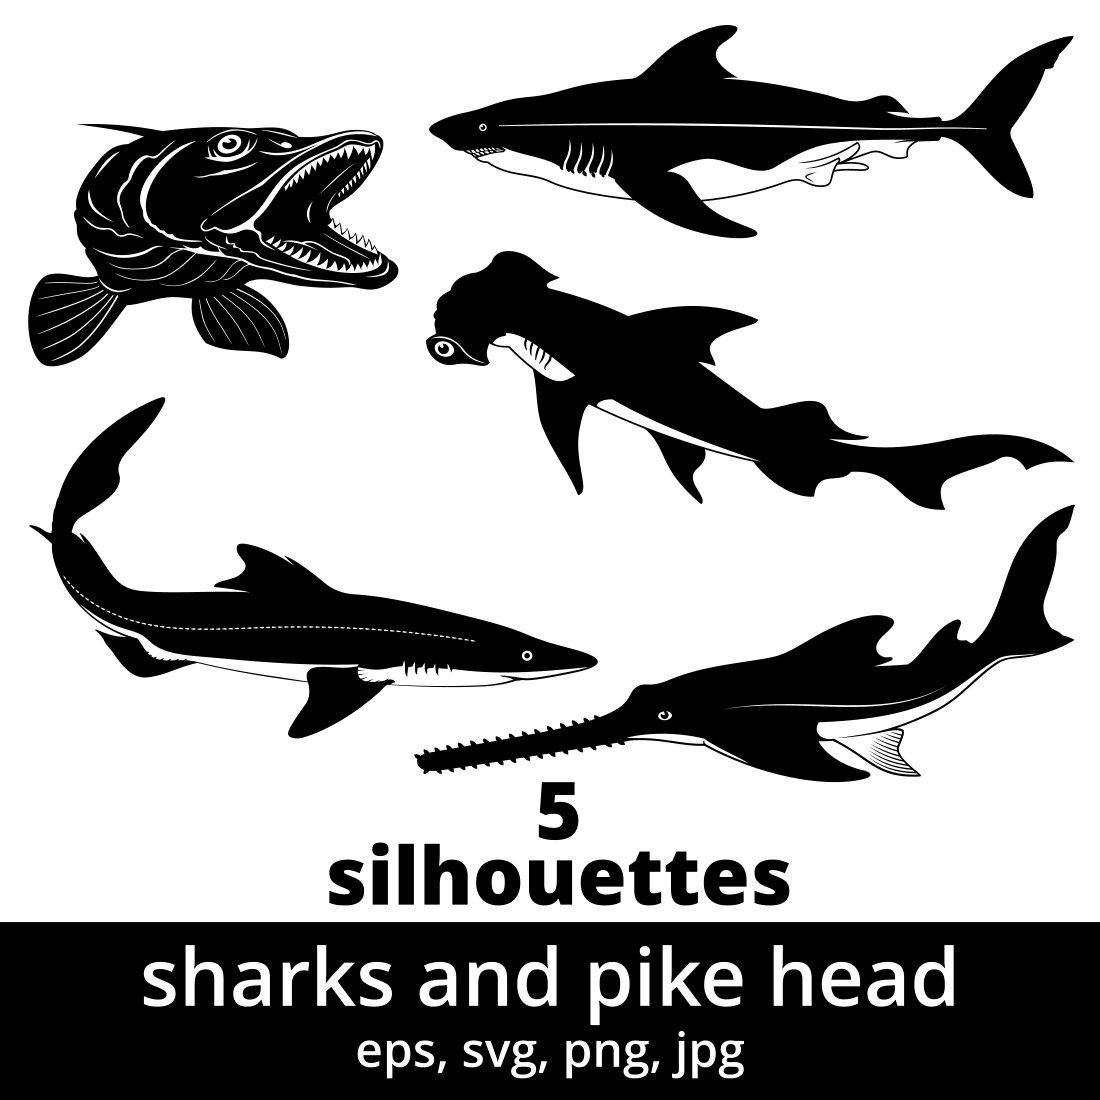 Five sharks and pike head fish silhouettes.